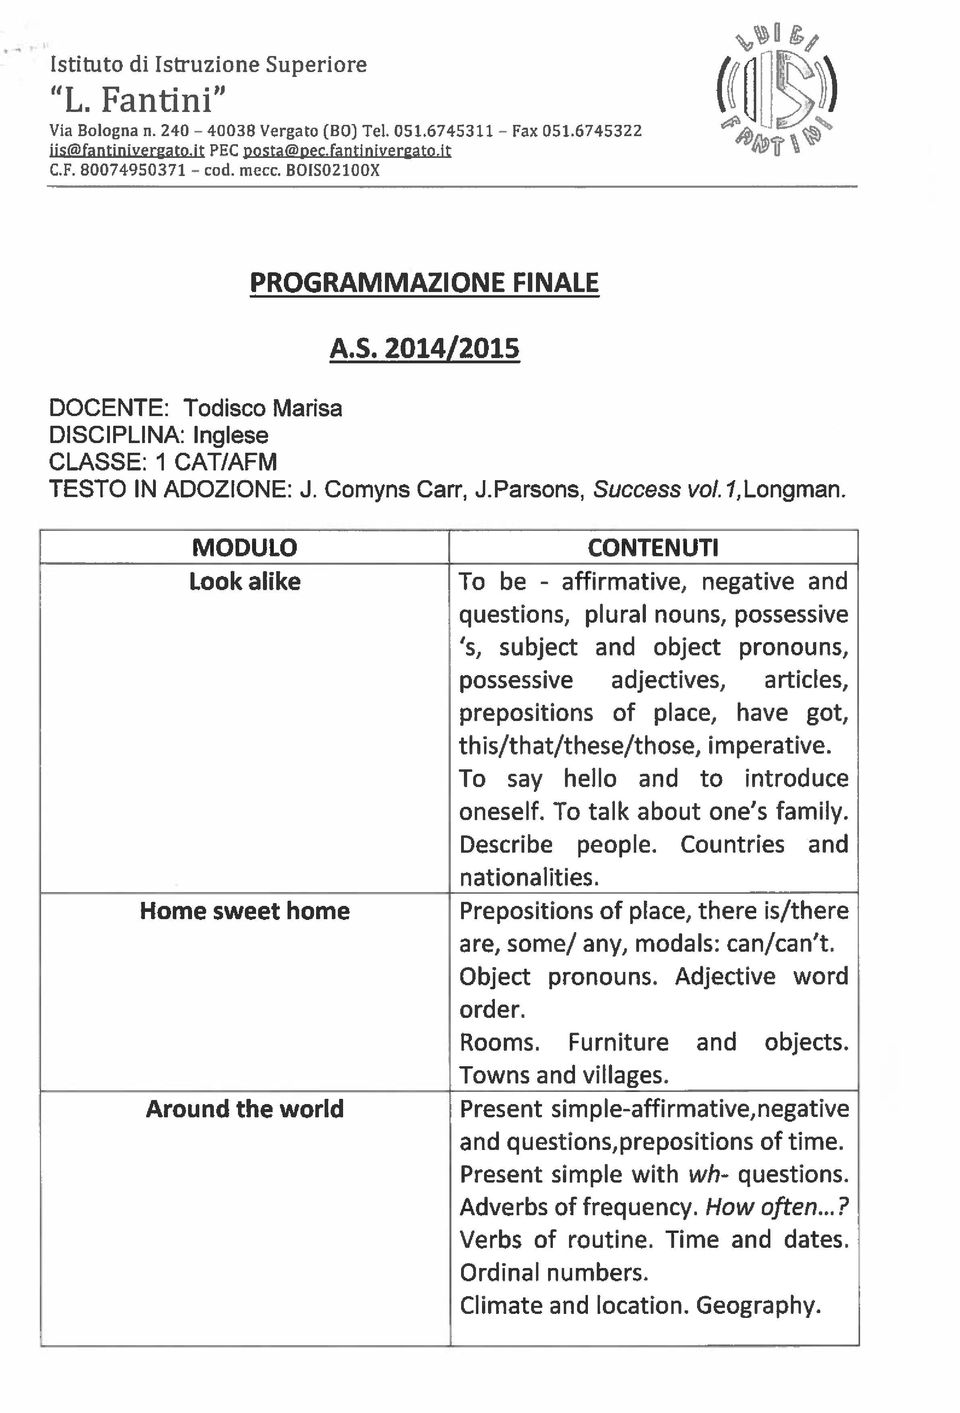 MODULO CONTENUTI Look alike To be - affirmative, negative and questions, plural nouns, possessive s, subject and object pronouns, possessive adjectives, articles, prepositions of piace, have got,